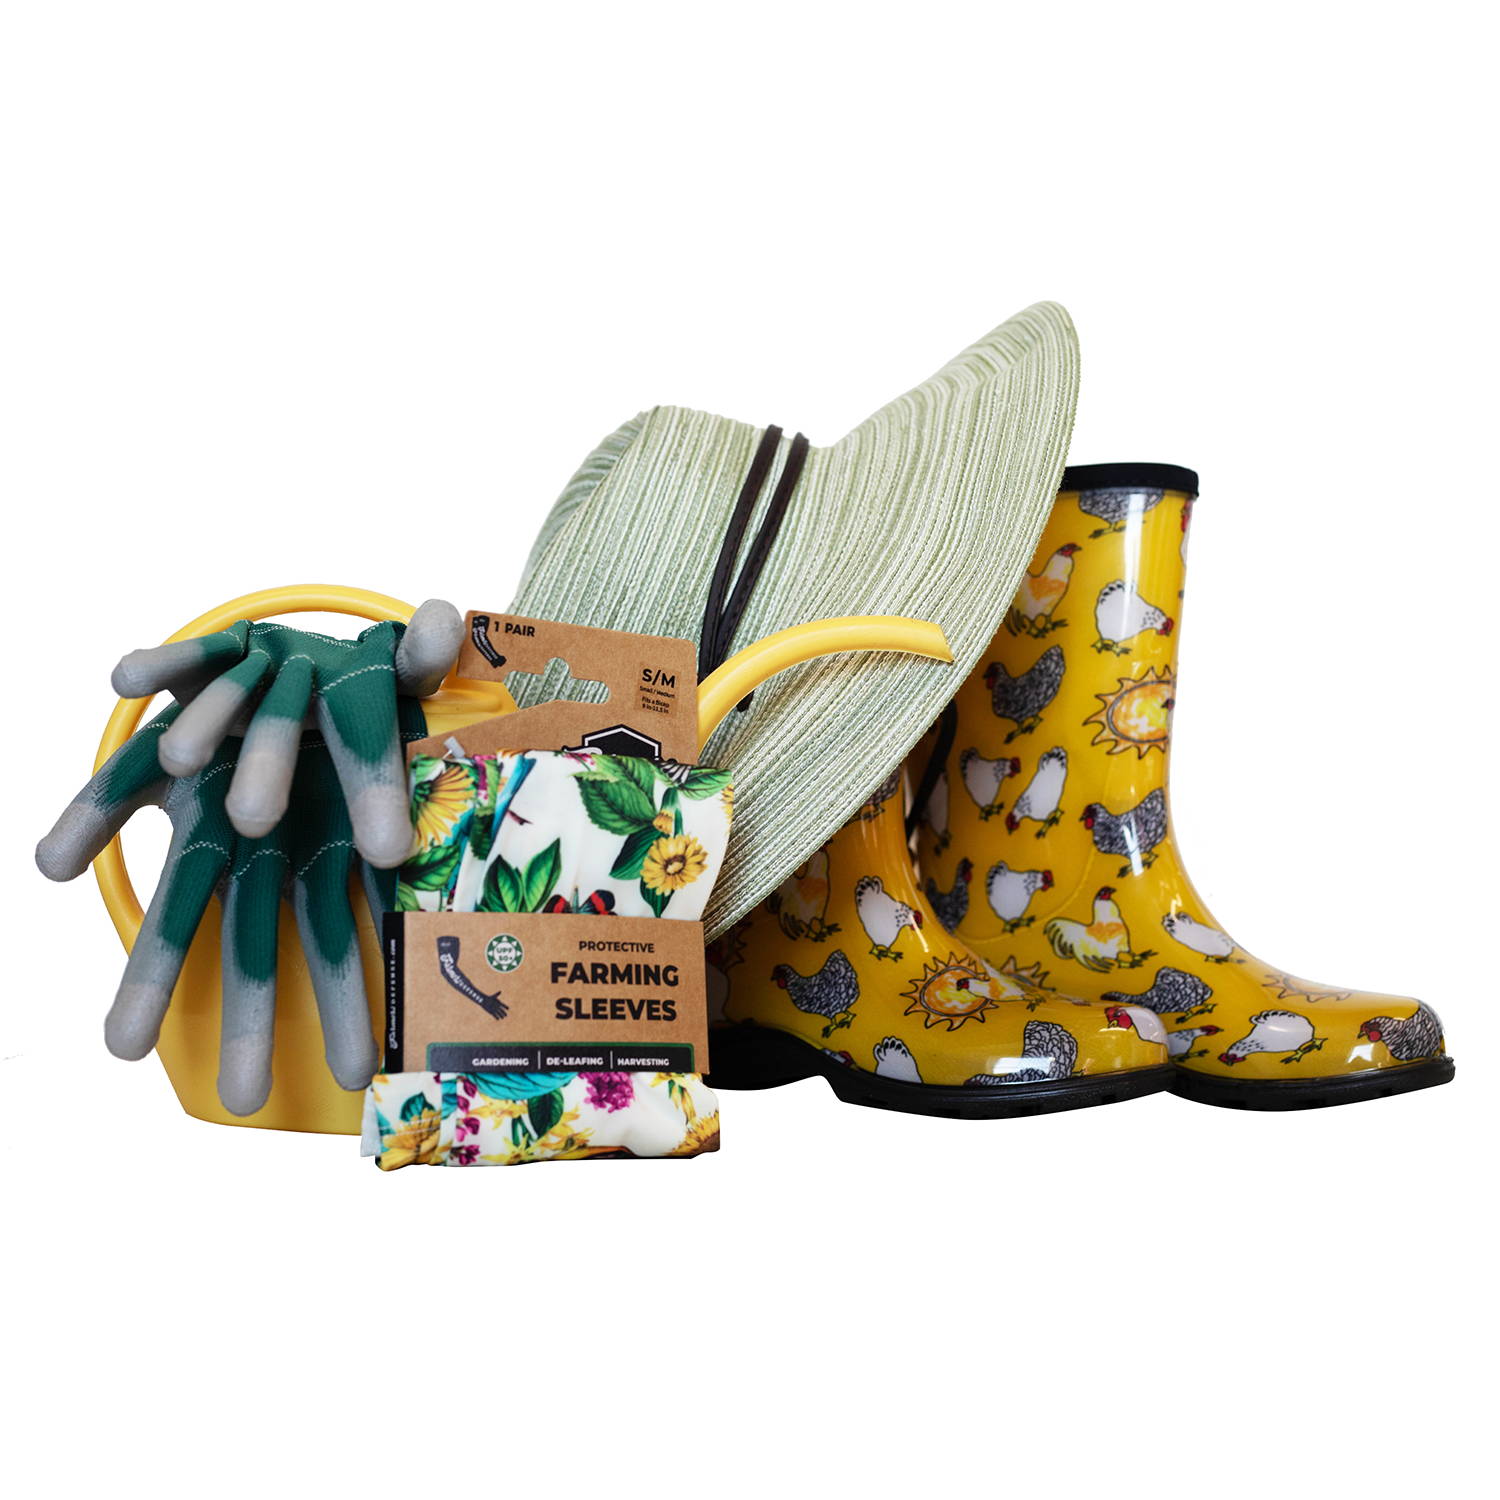 gardening boots, gloves, hats and more